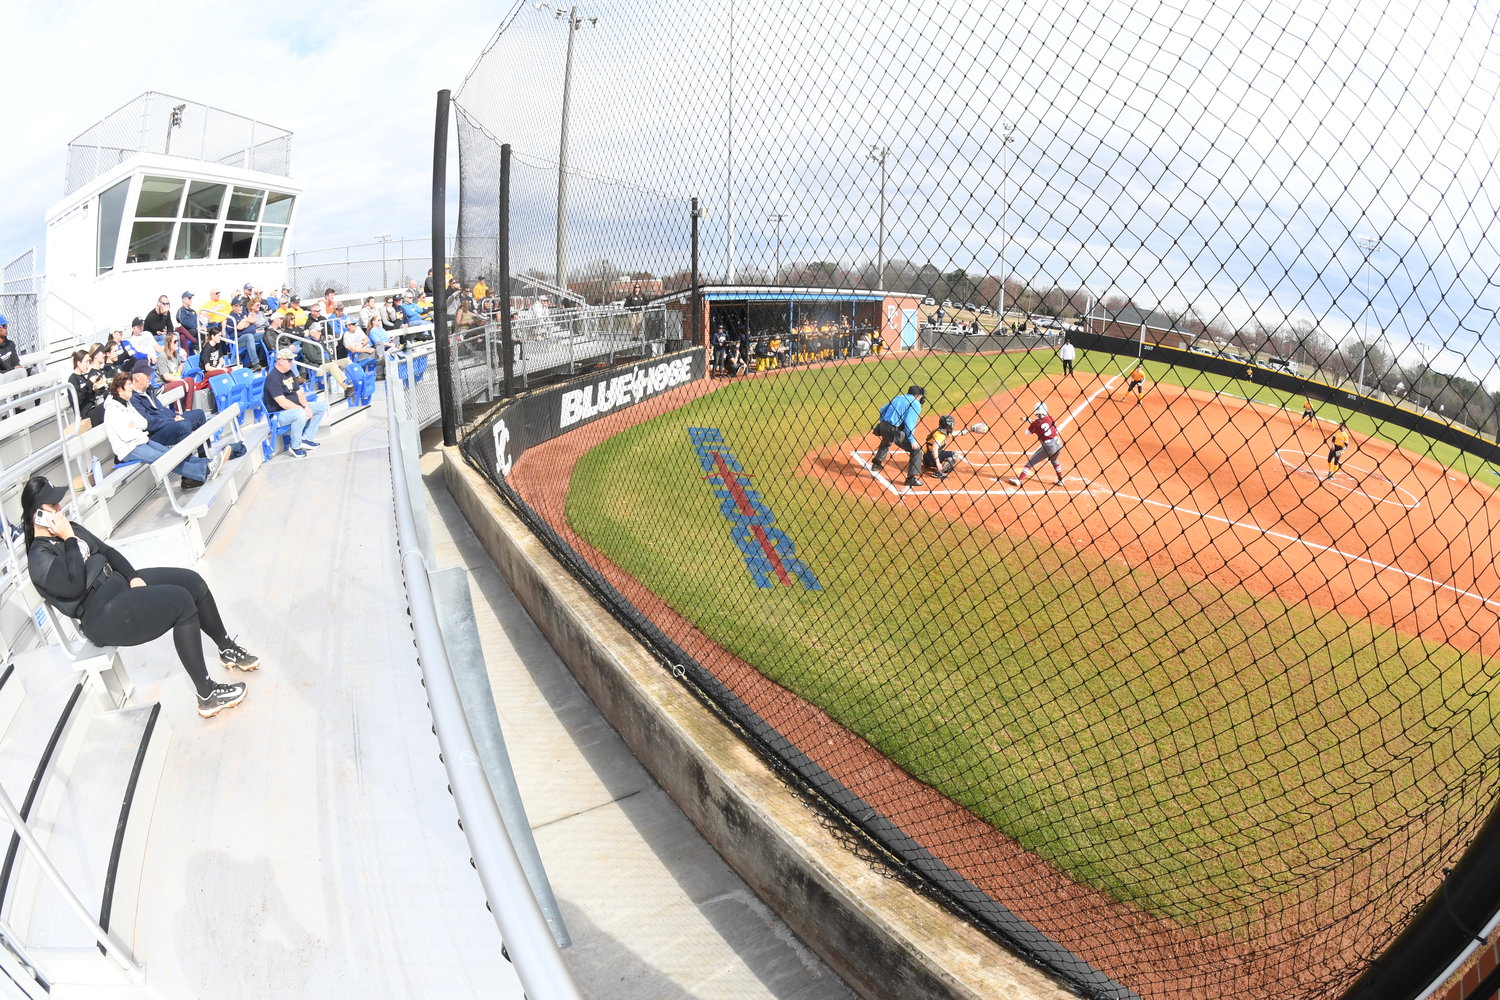 The PC Softball Complex has new spectators' seating, a press box, and lights after extensive renovations. A restrooms building is nearby.